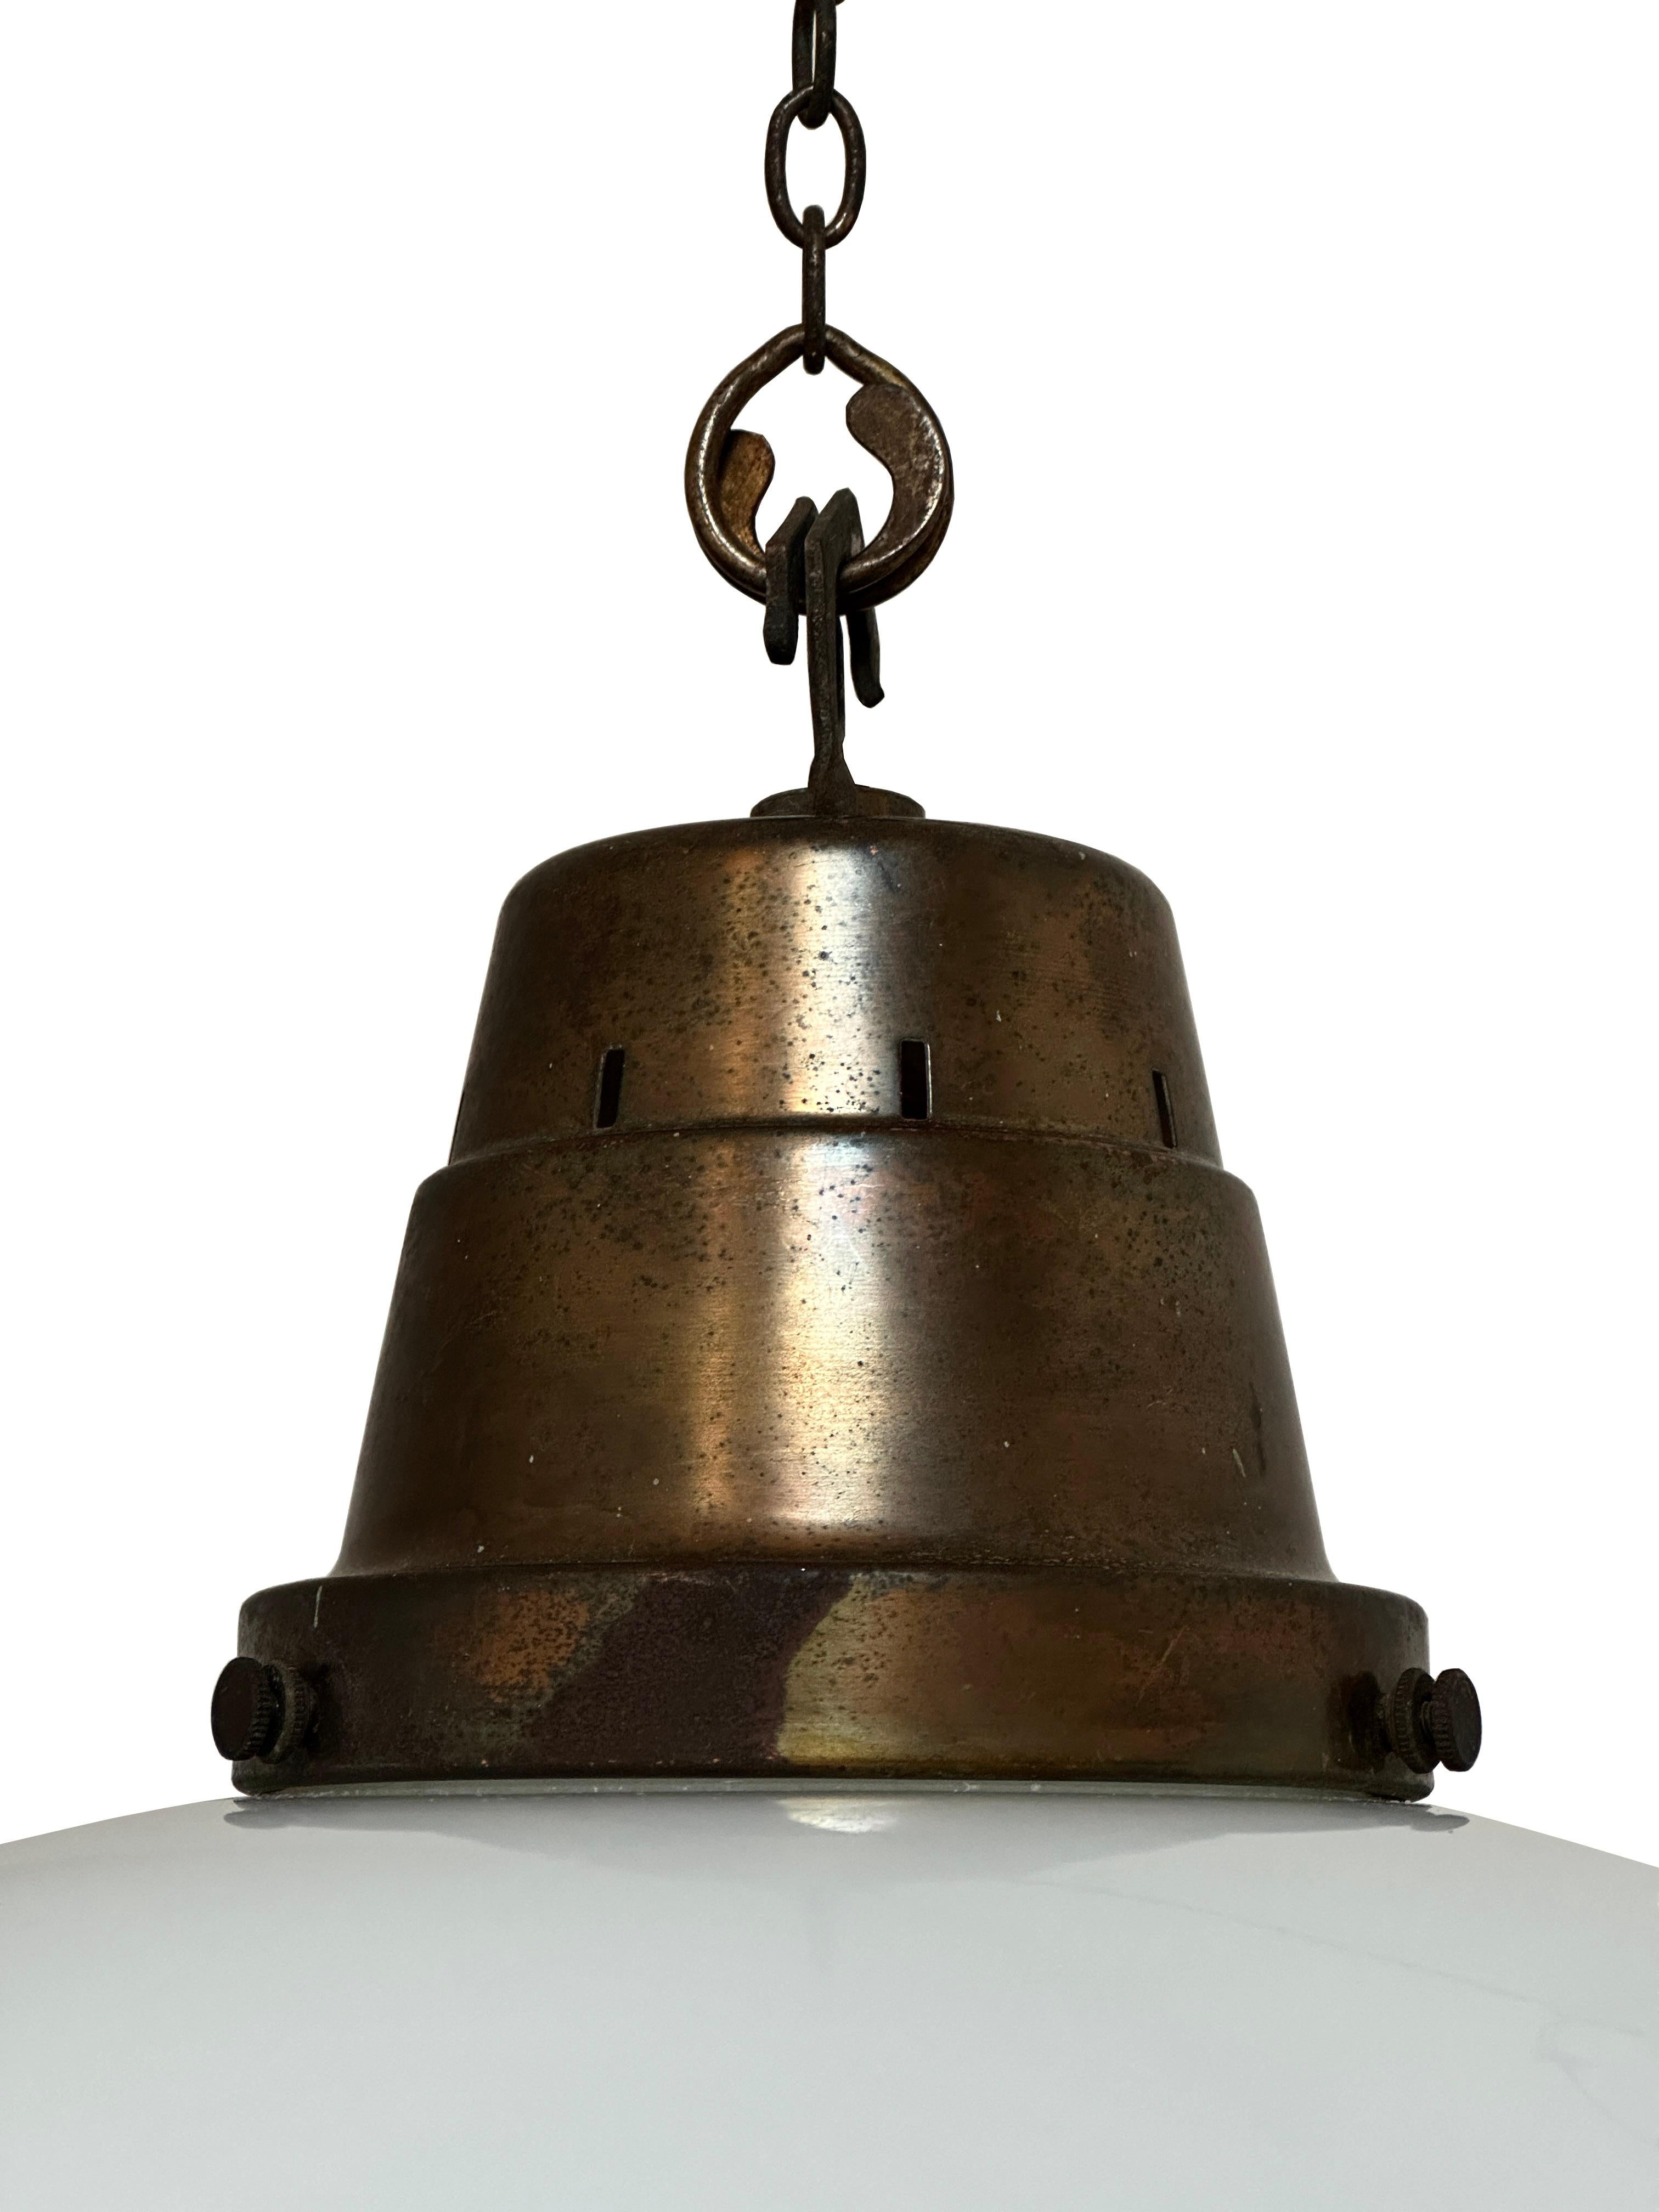 Antique Vintage Copper Ovaloid Opaline Milk Glass Ceiling Pendant Light Lamp In Good Condition For Sale In Sale, GB